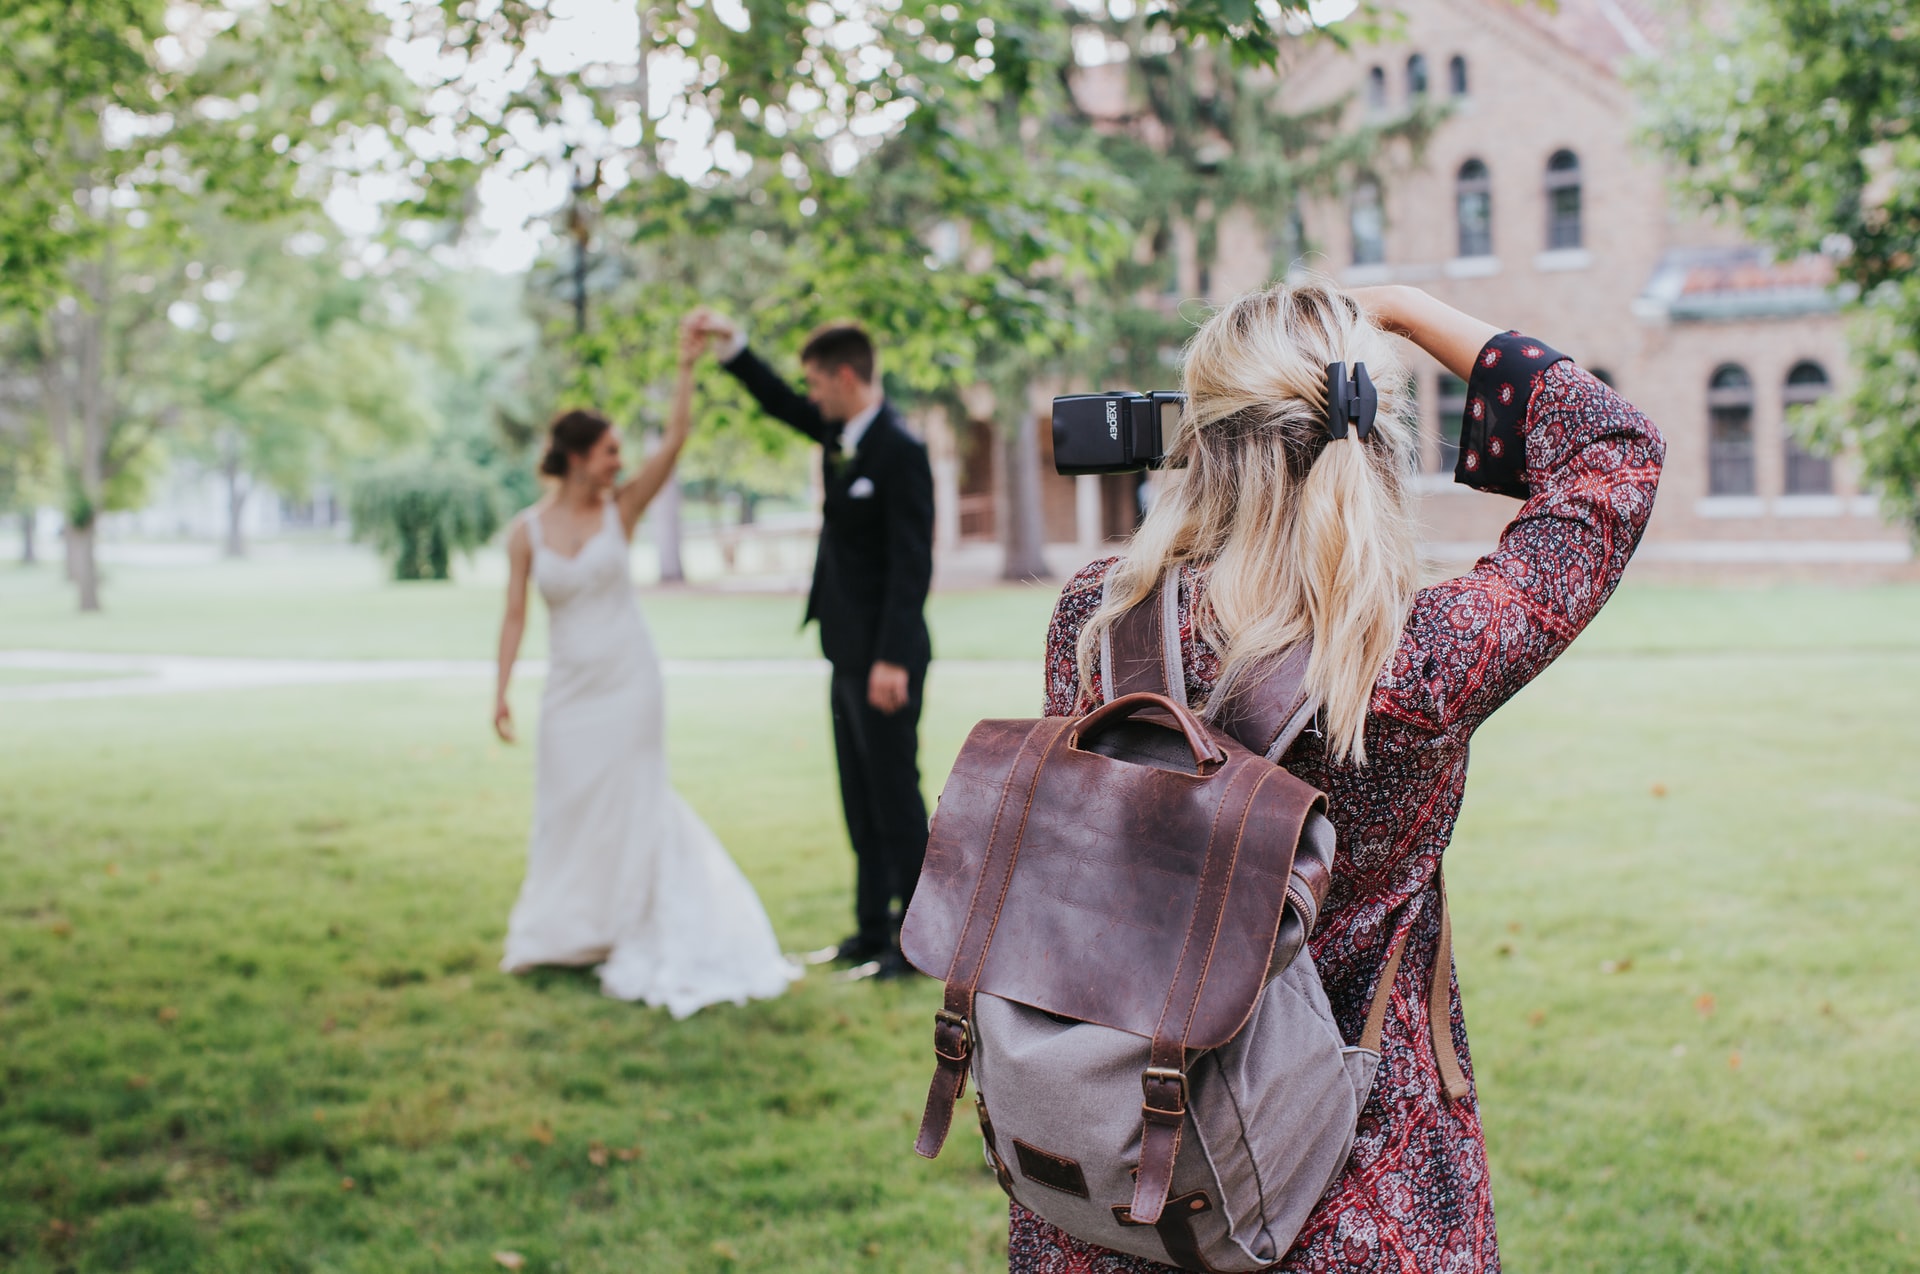 Photographer taking pictures of a couple at a wedding